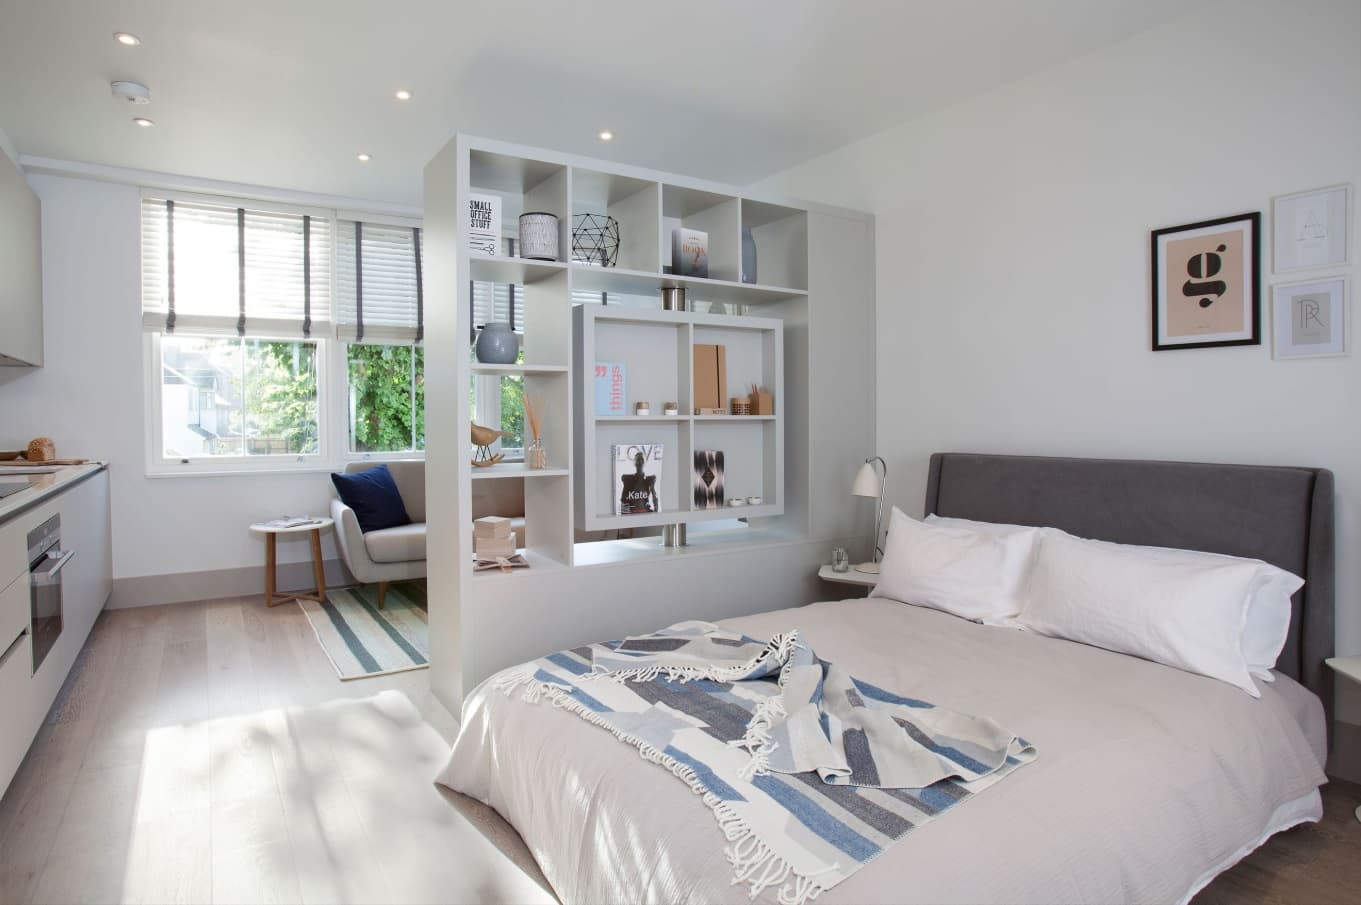 6 Places That Dust May Be Lurking in Your Home. Inner zoning shelving in the bedroom